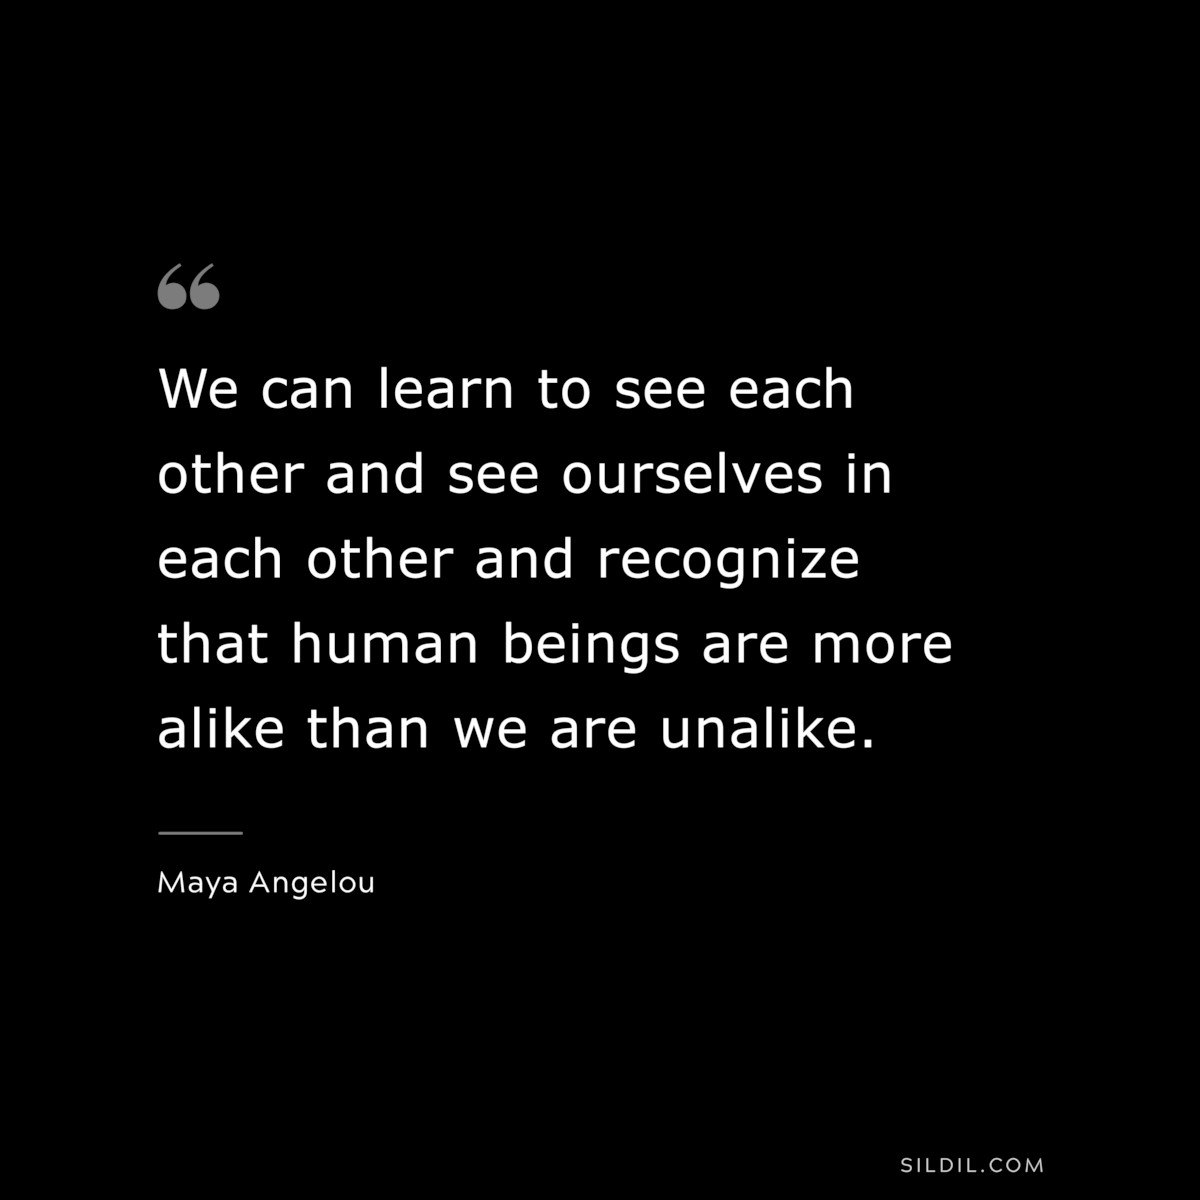 We can learn to see each other and see ourselves in each other and recognize that human beings are more alike than we are unalike. ― Maya Angelou